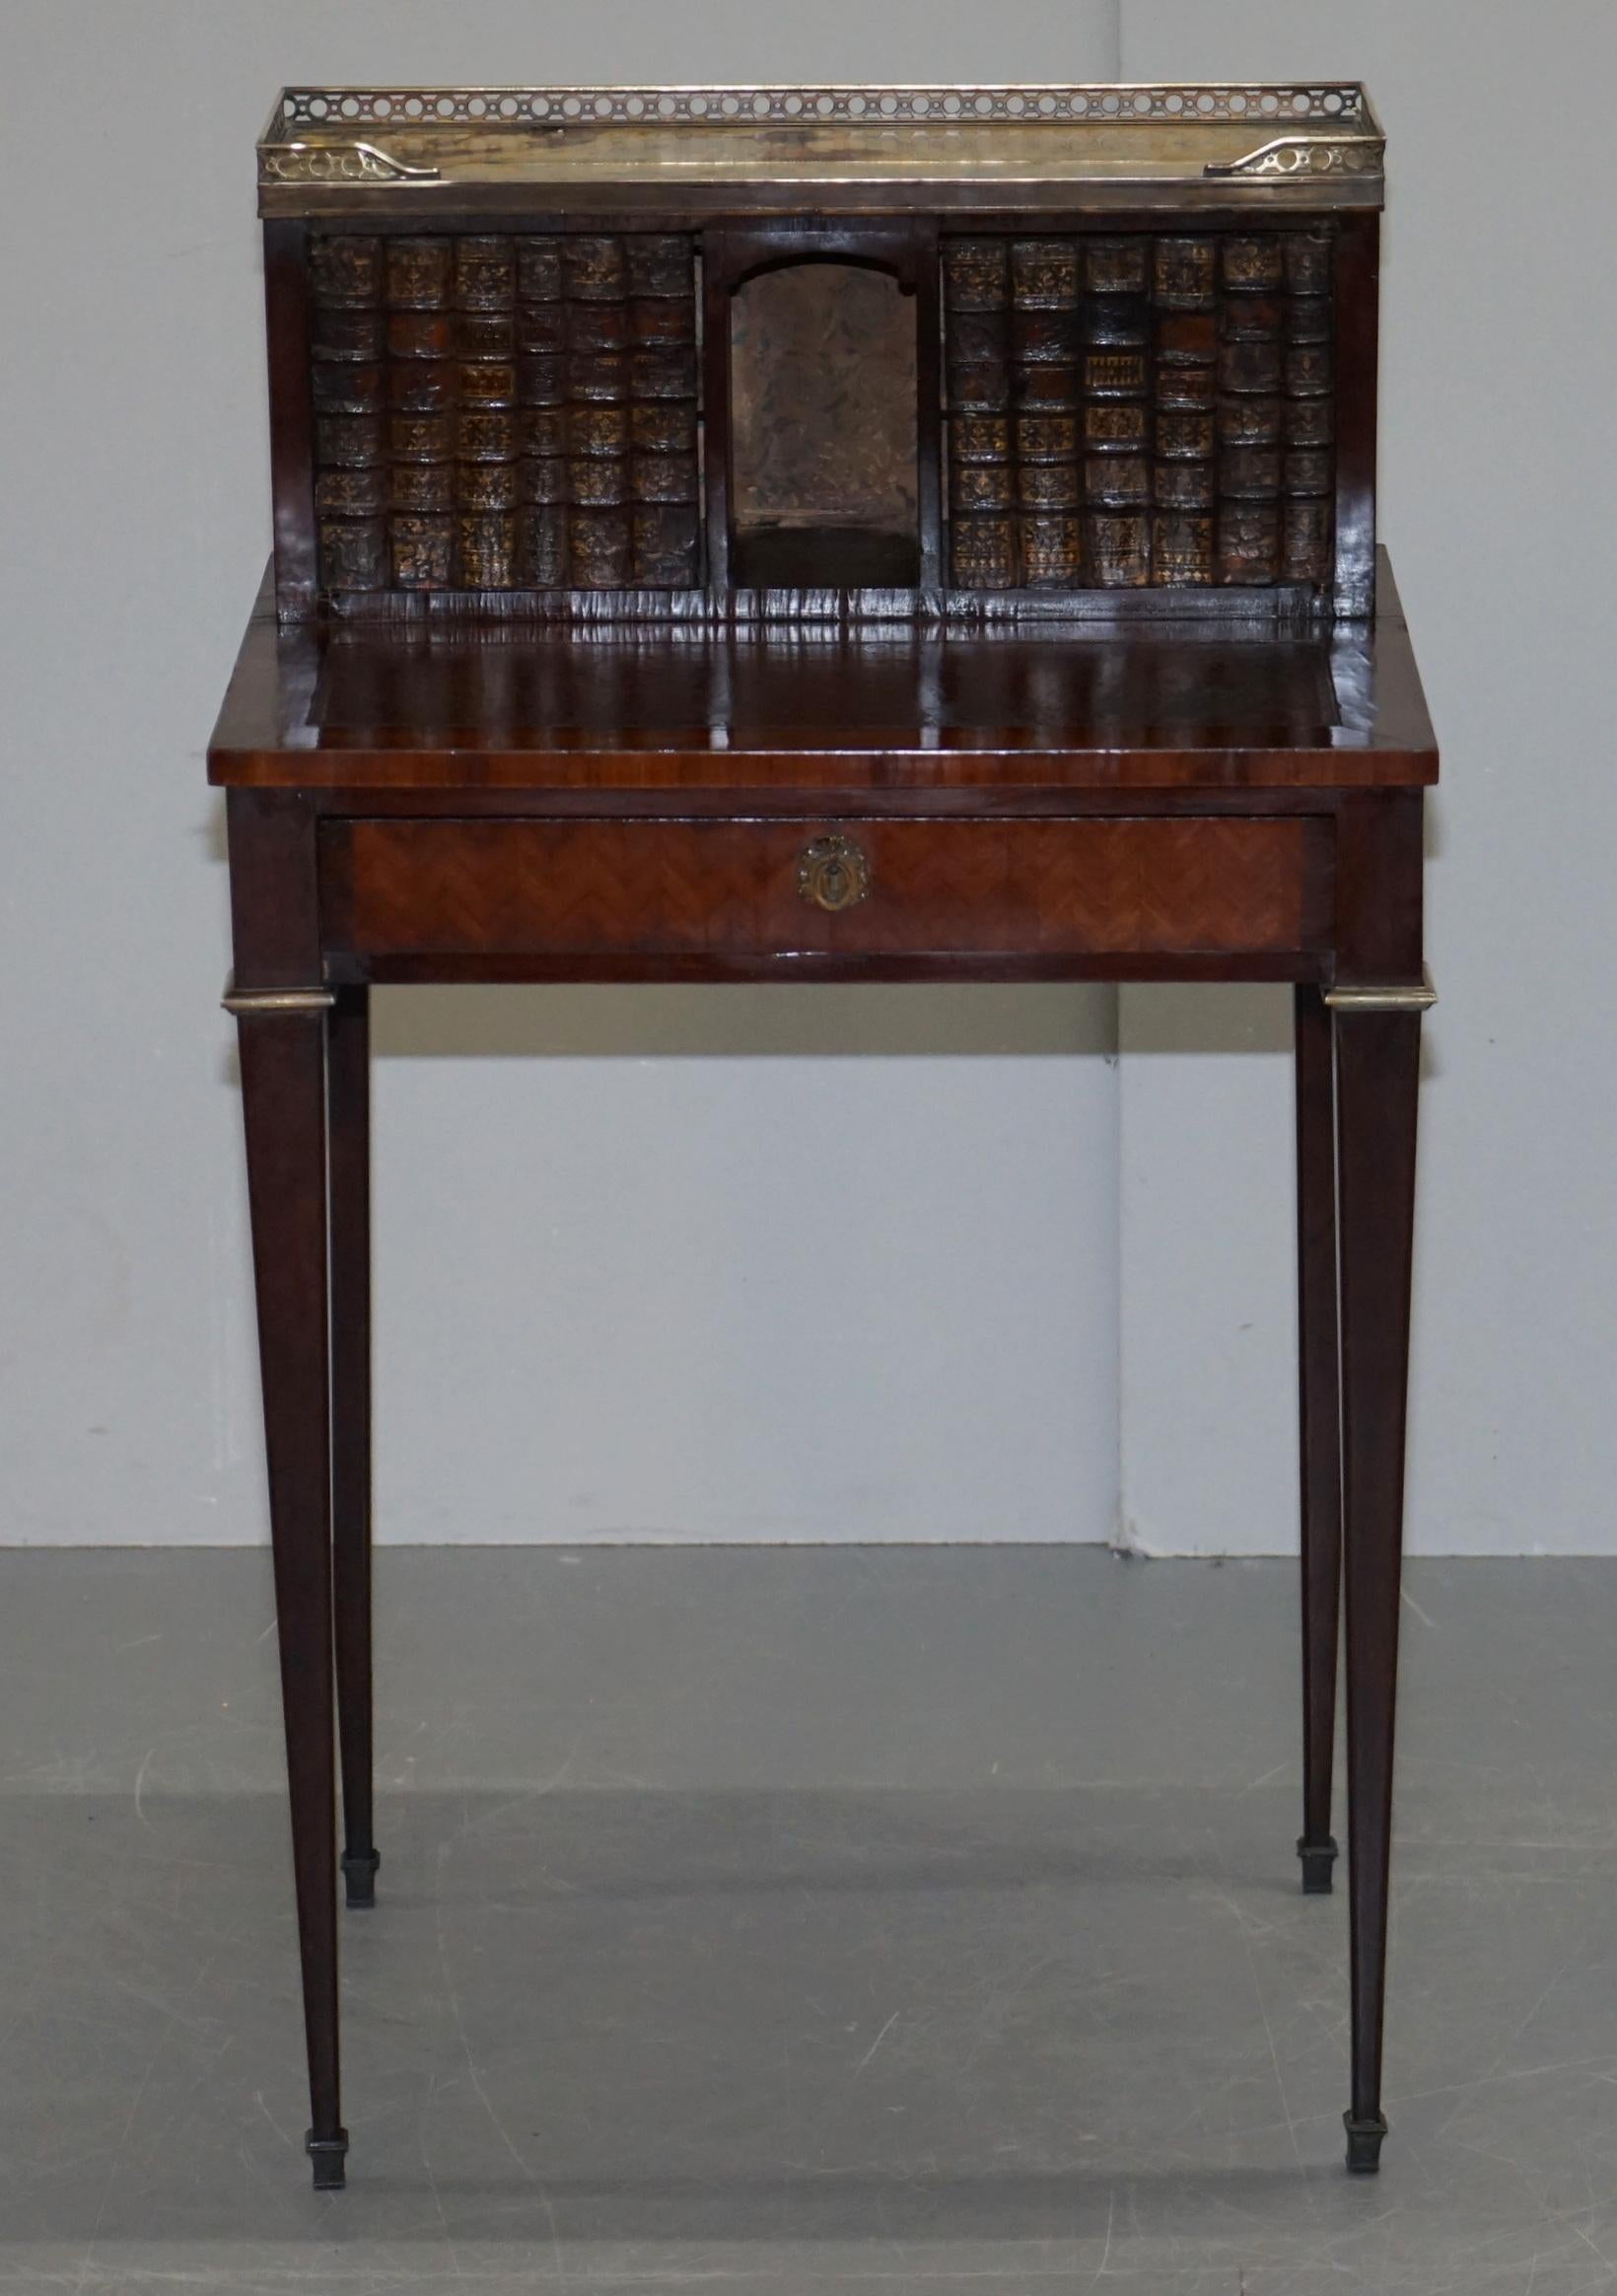 We are delighted to offer for sale this very rare fully restored circa 1870 hardwood and Parquetry Bonheur Du Jour with marble top surmounted by brass gallery rail, leather top and faux books

This is an exceptionally fine piece of antique